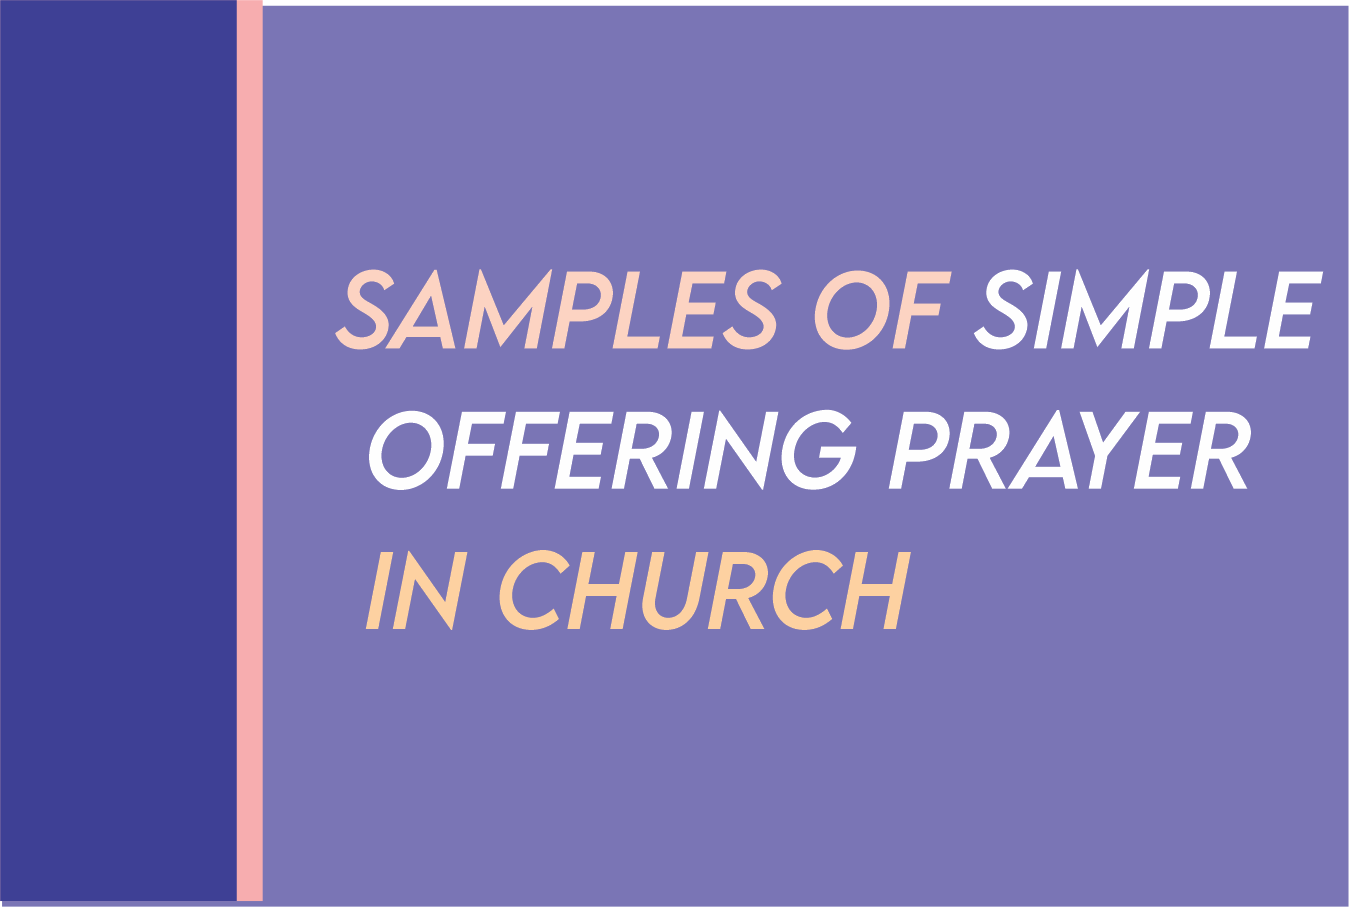 Samples of Simple Offering Prayer In Church